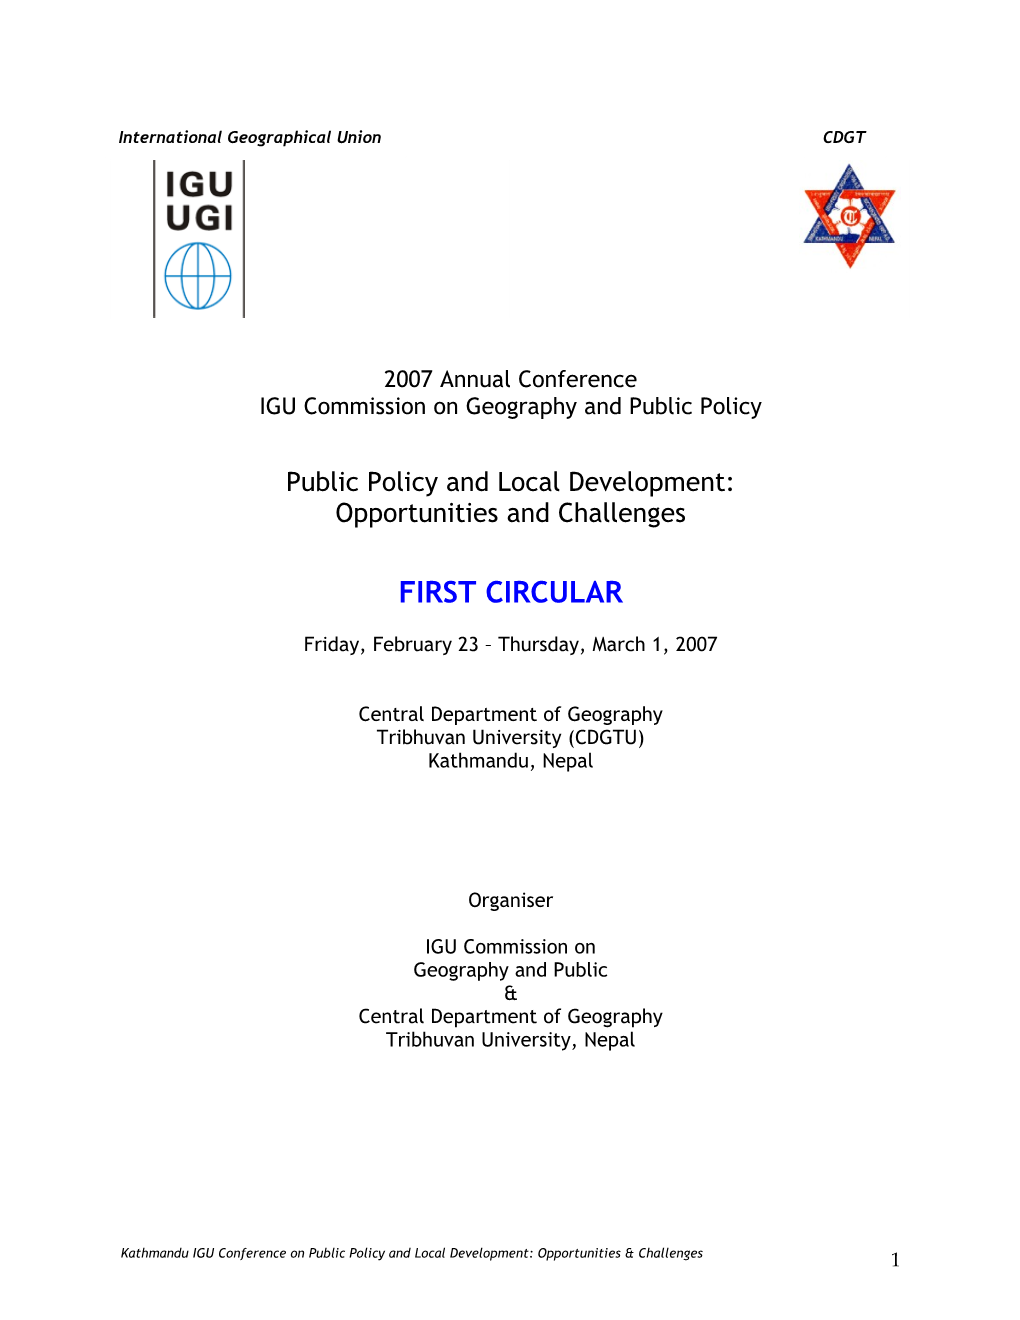 IGU Commission on Geography and Public Policy